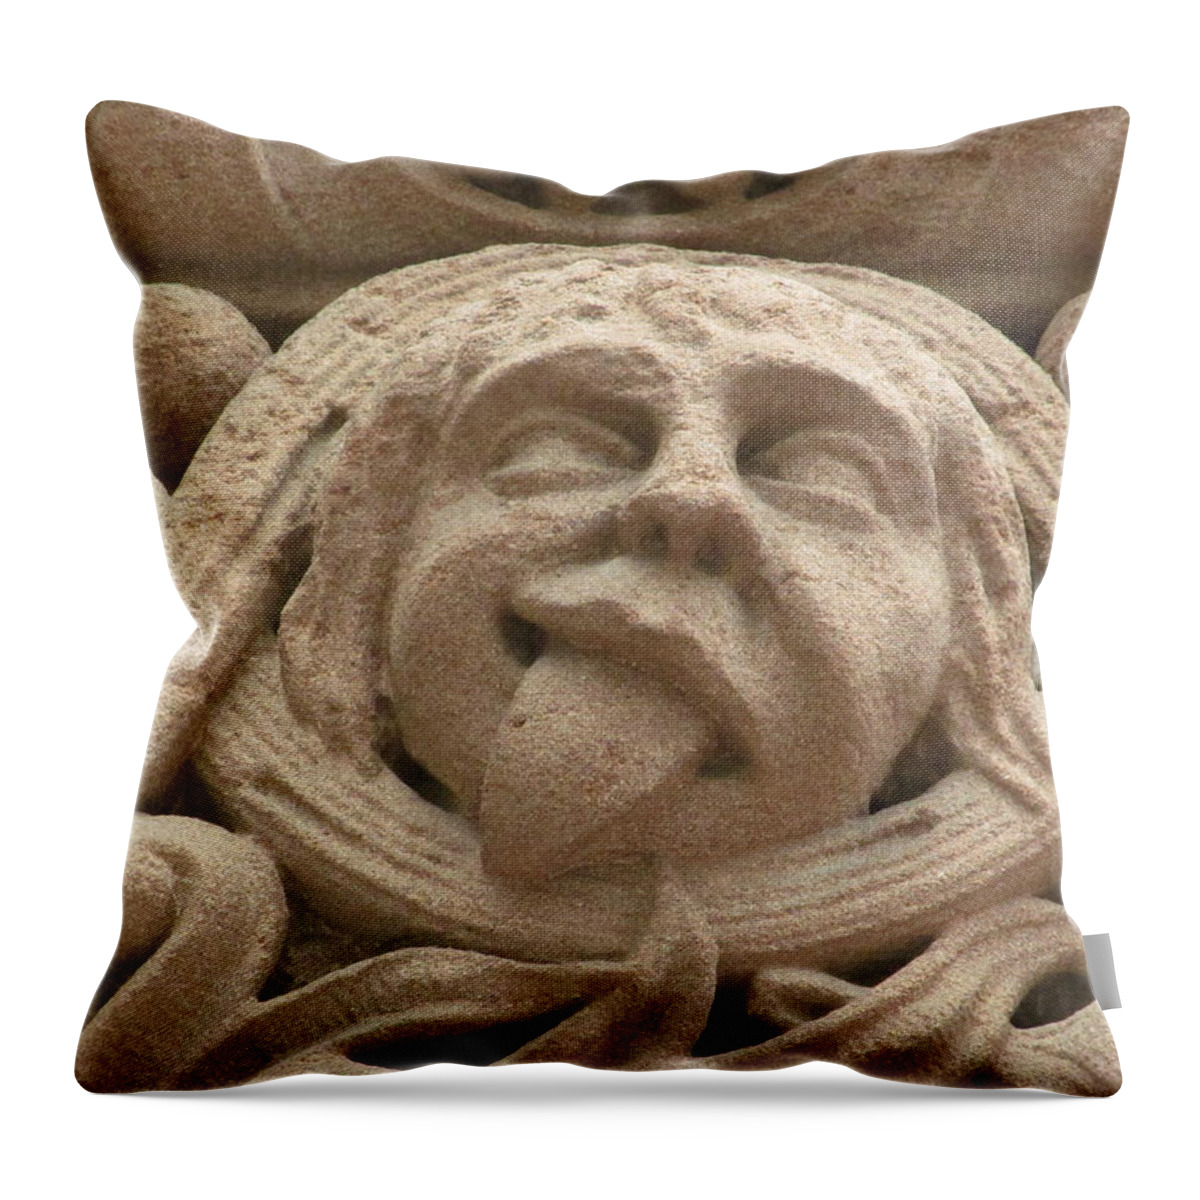 Stone Carving Throw Pillow featuring the photograph Make A Face by Alfred Ng